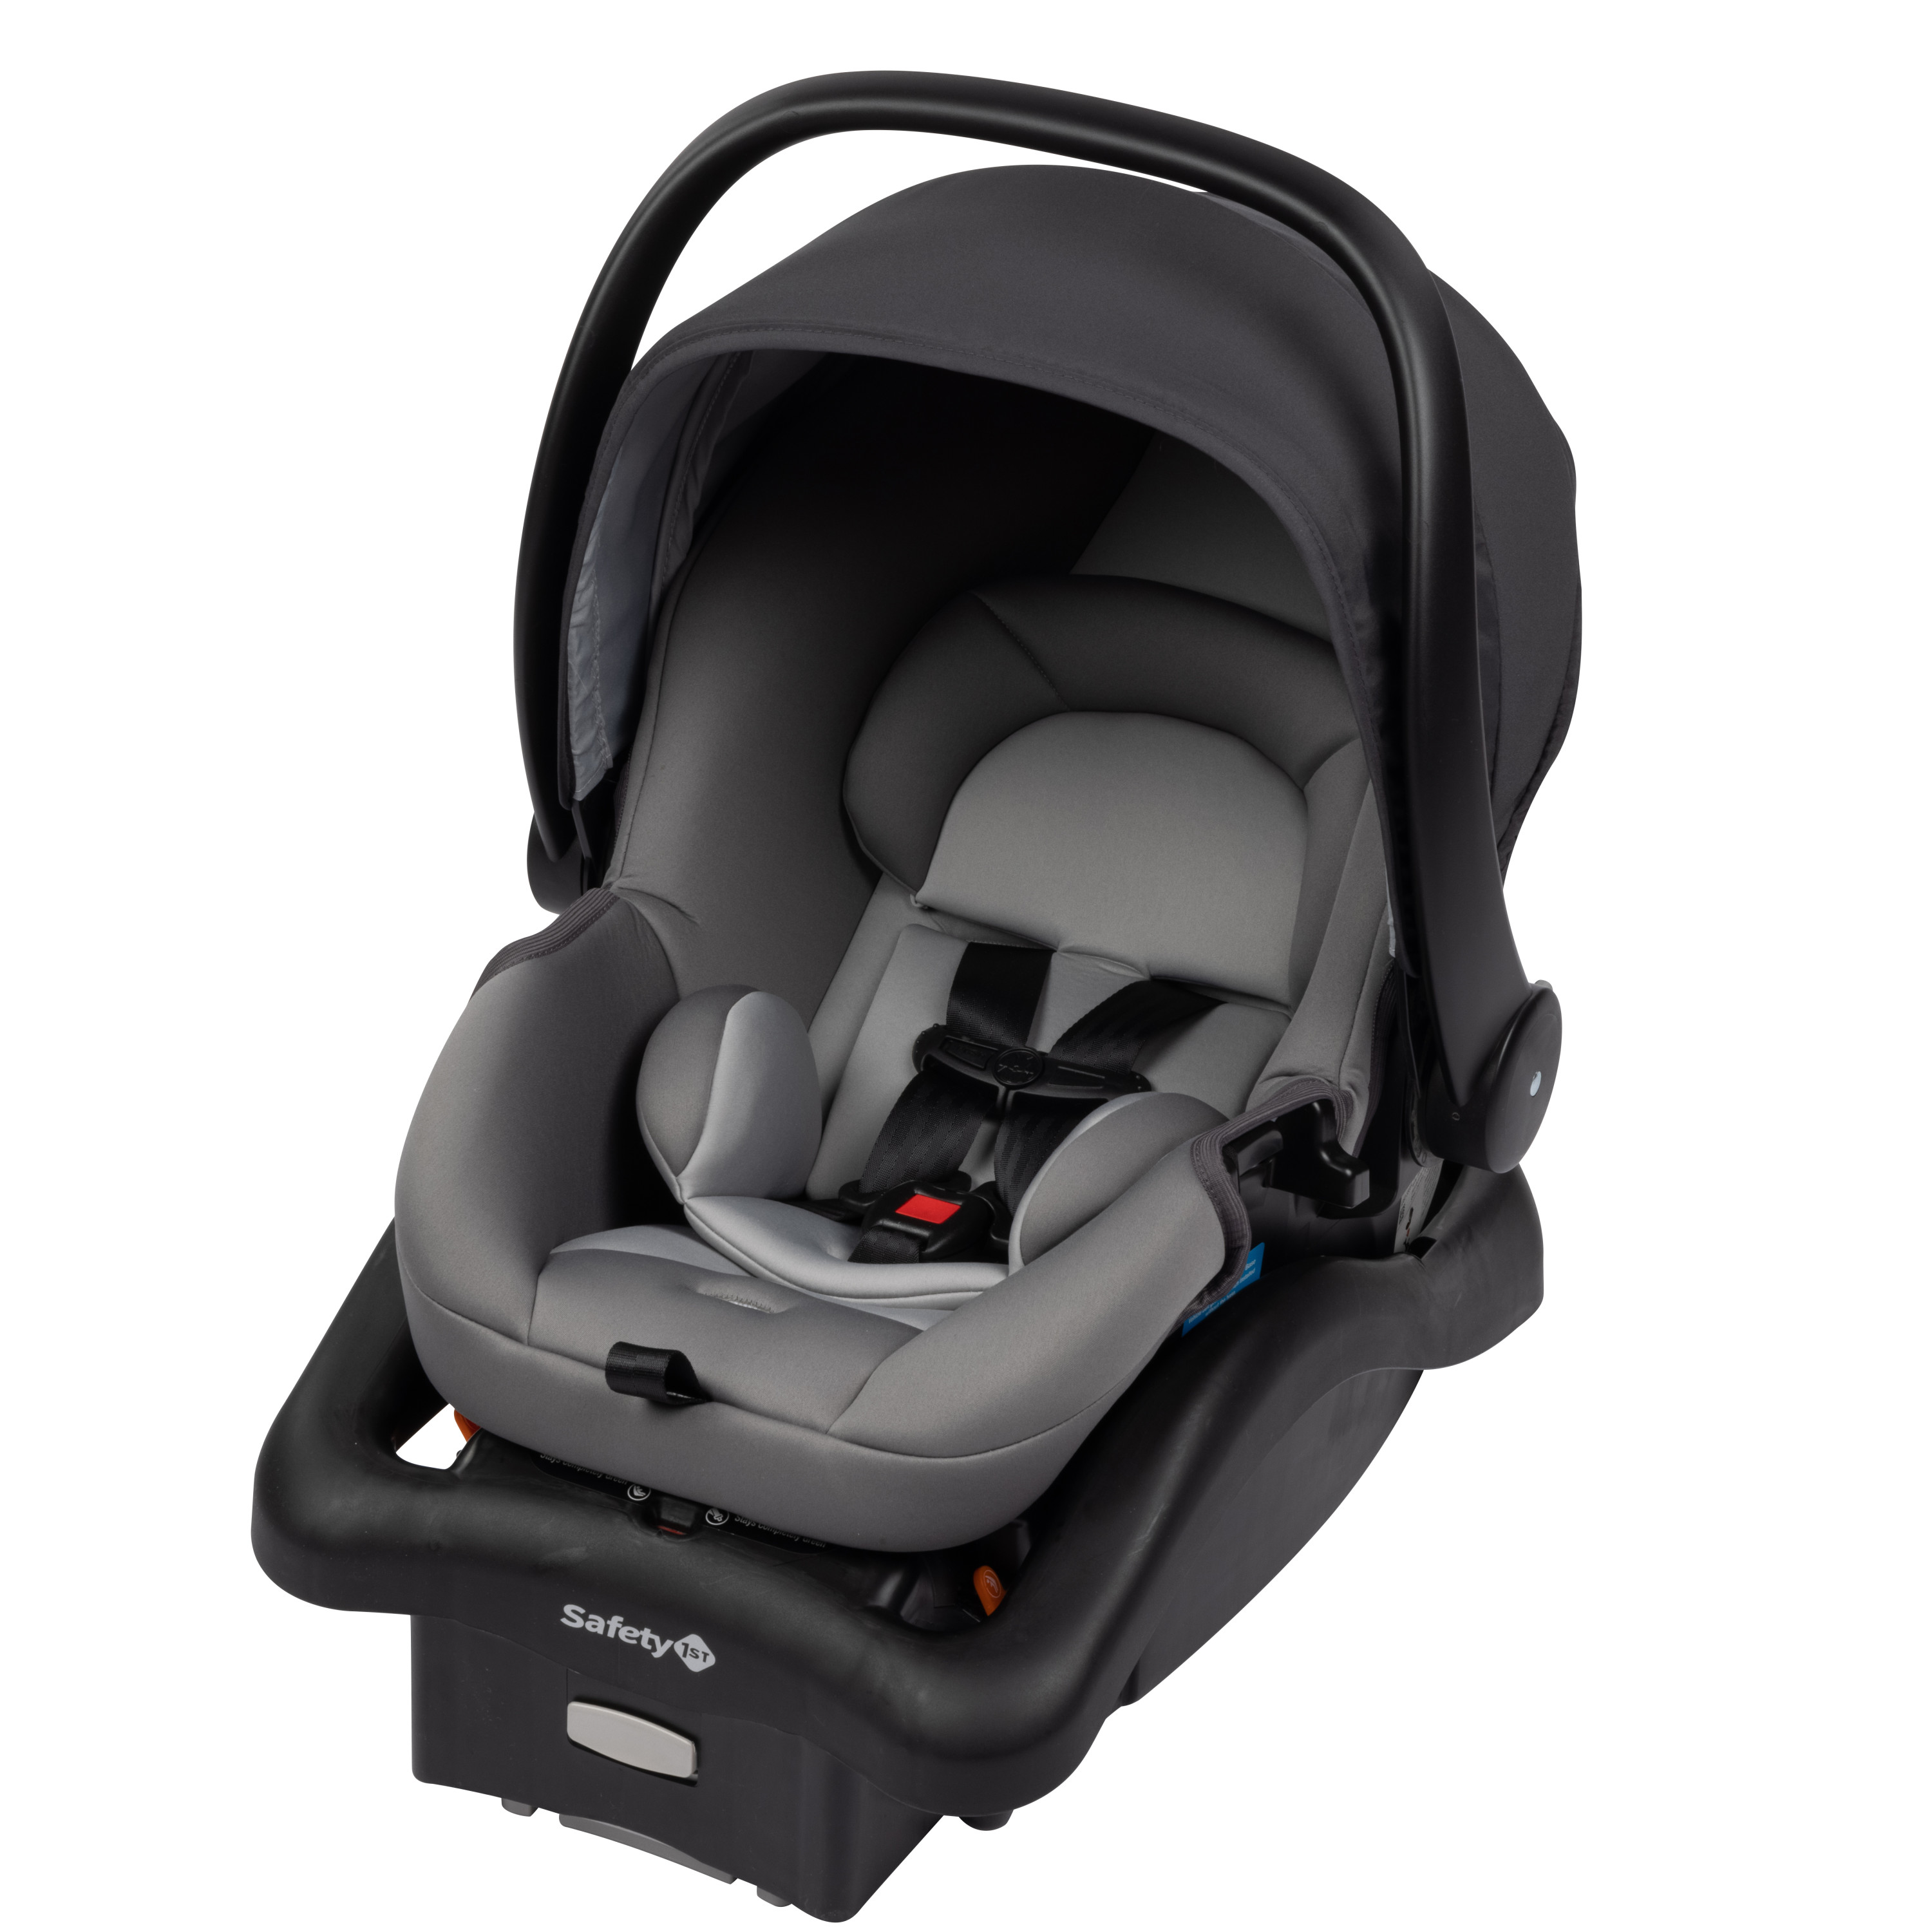 Safety 1st Onboard 35 Secure Tech Infant Car Seat, Set in Stone - image 1 of 22